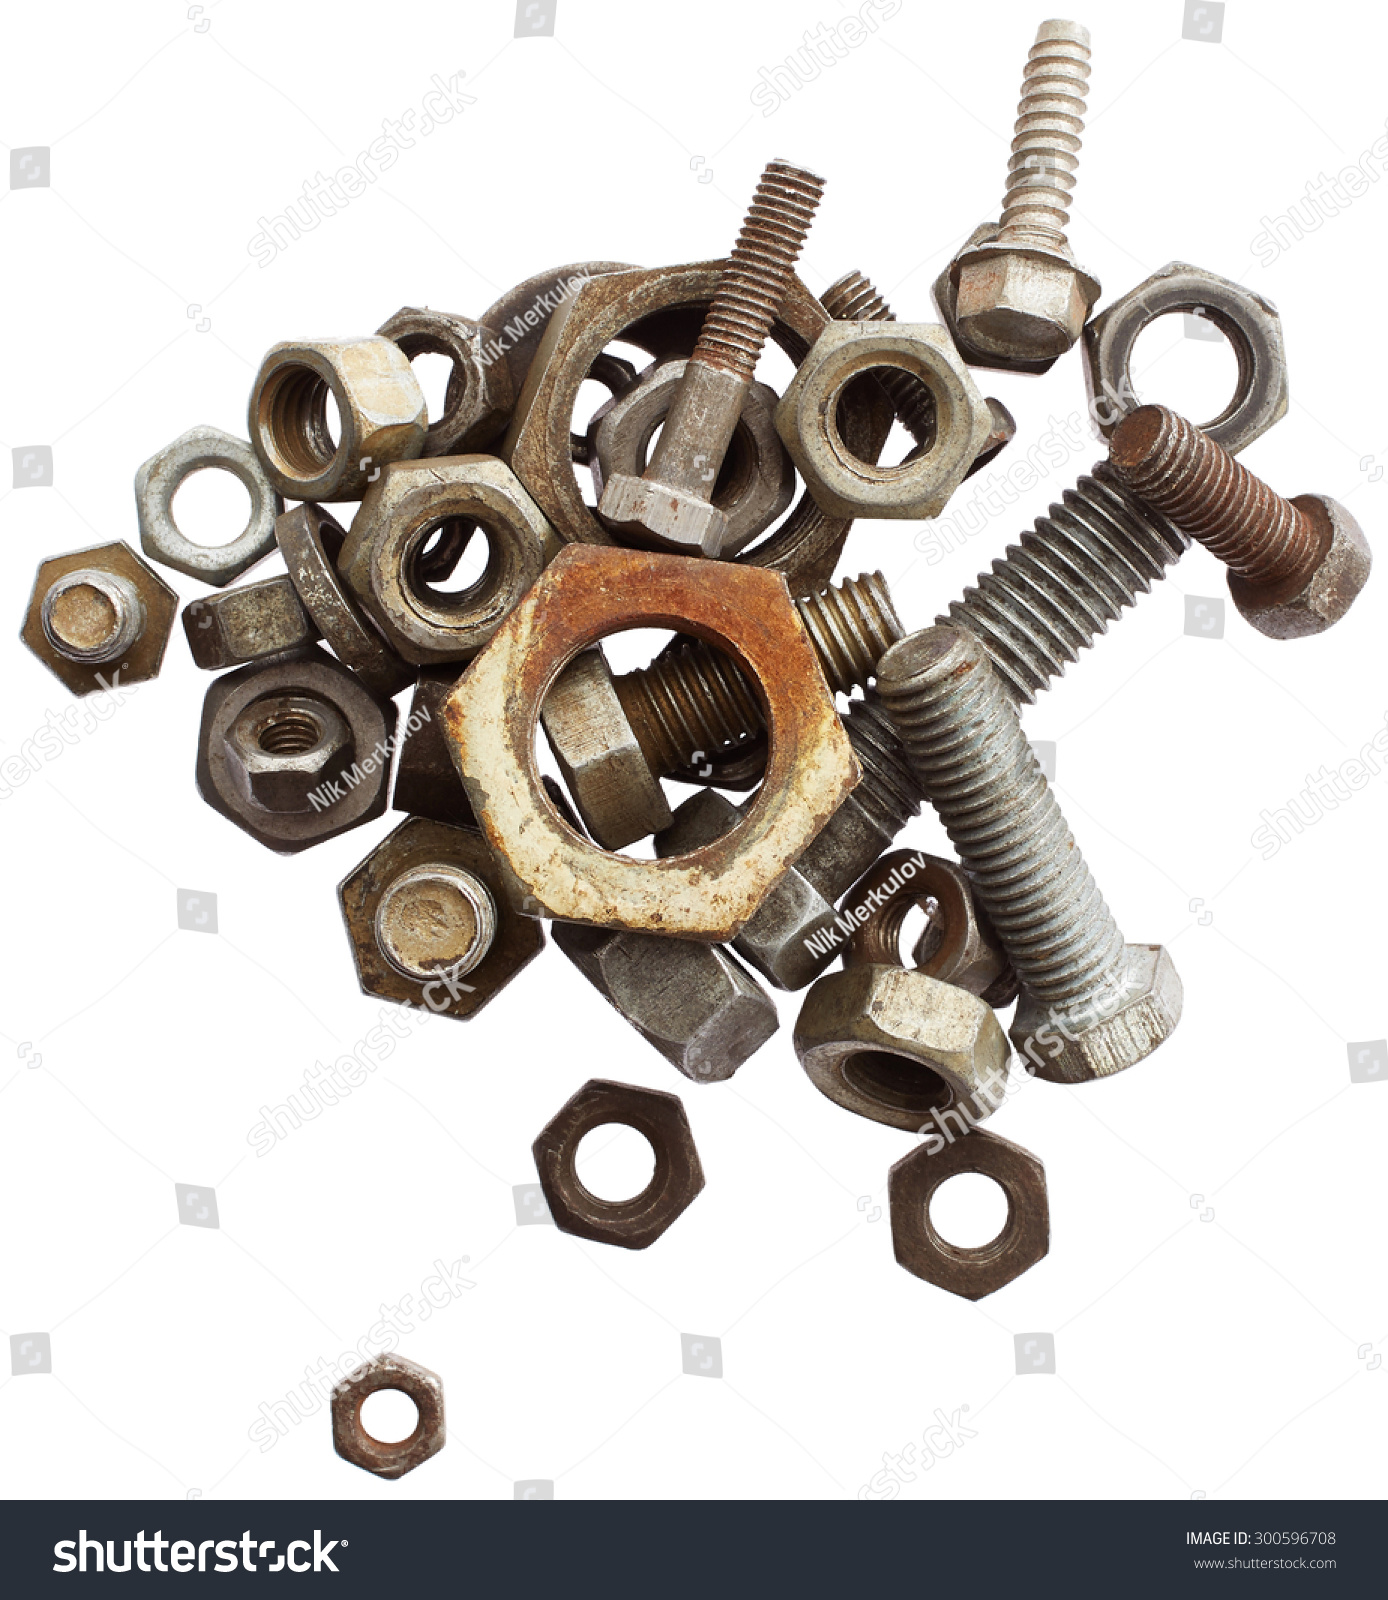 Old Bolts Nuts Isolated On White Stock Photo 300596708 - Shutterstock